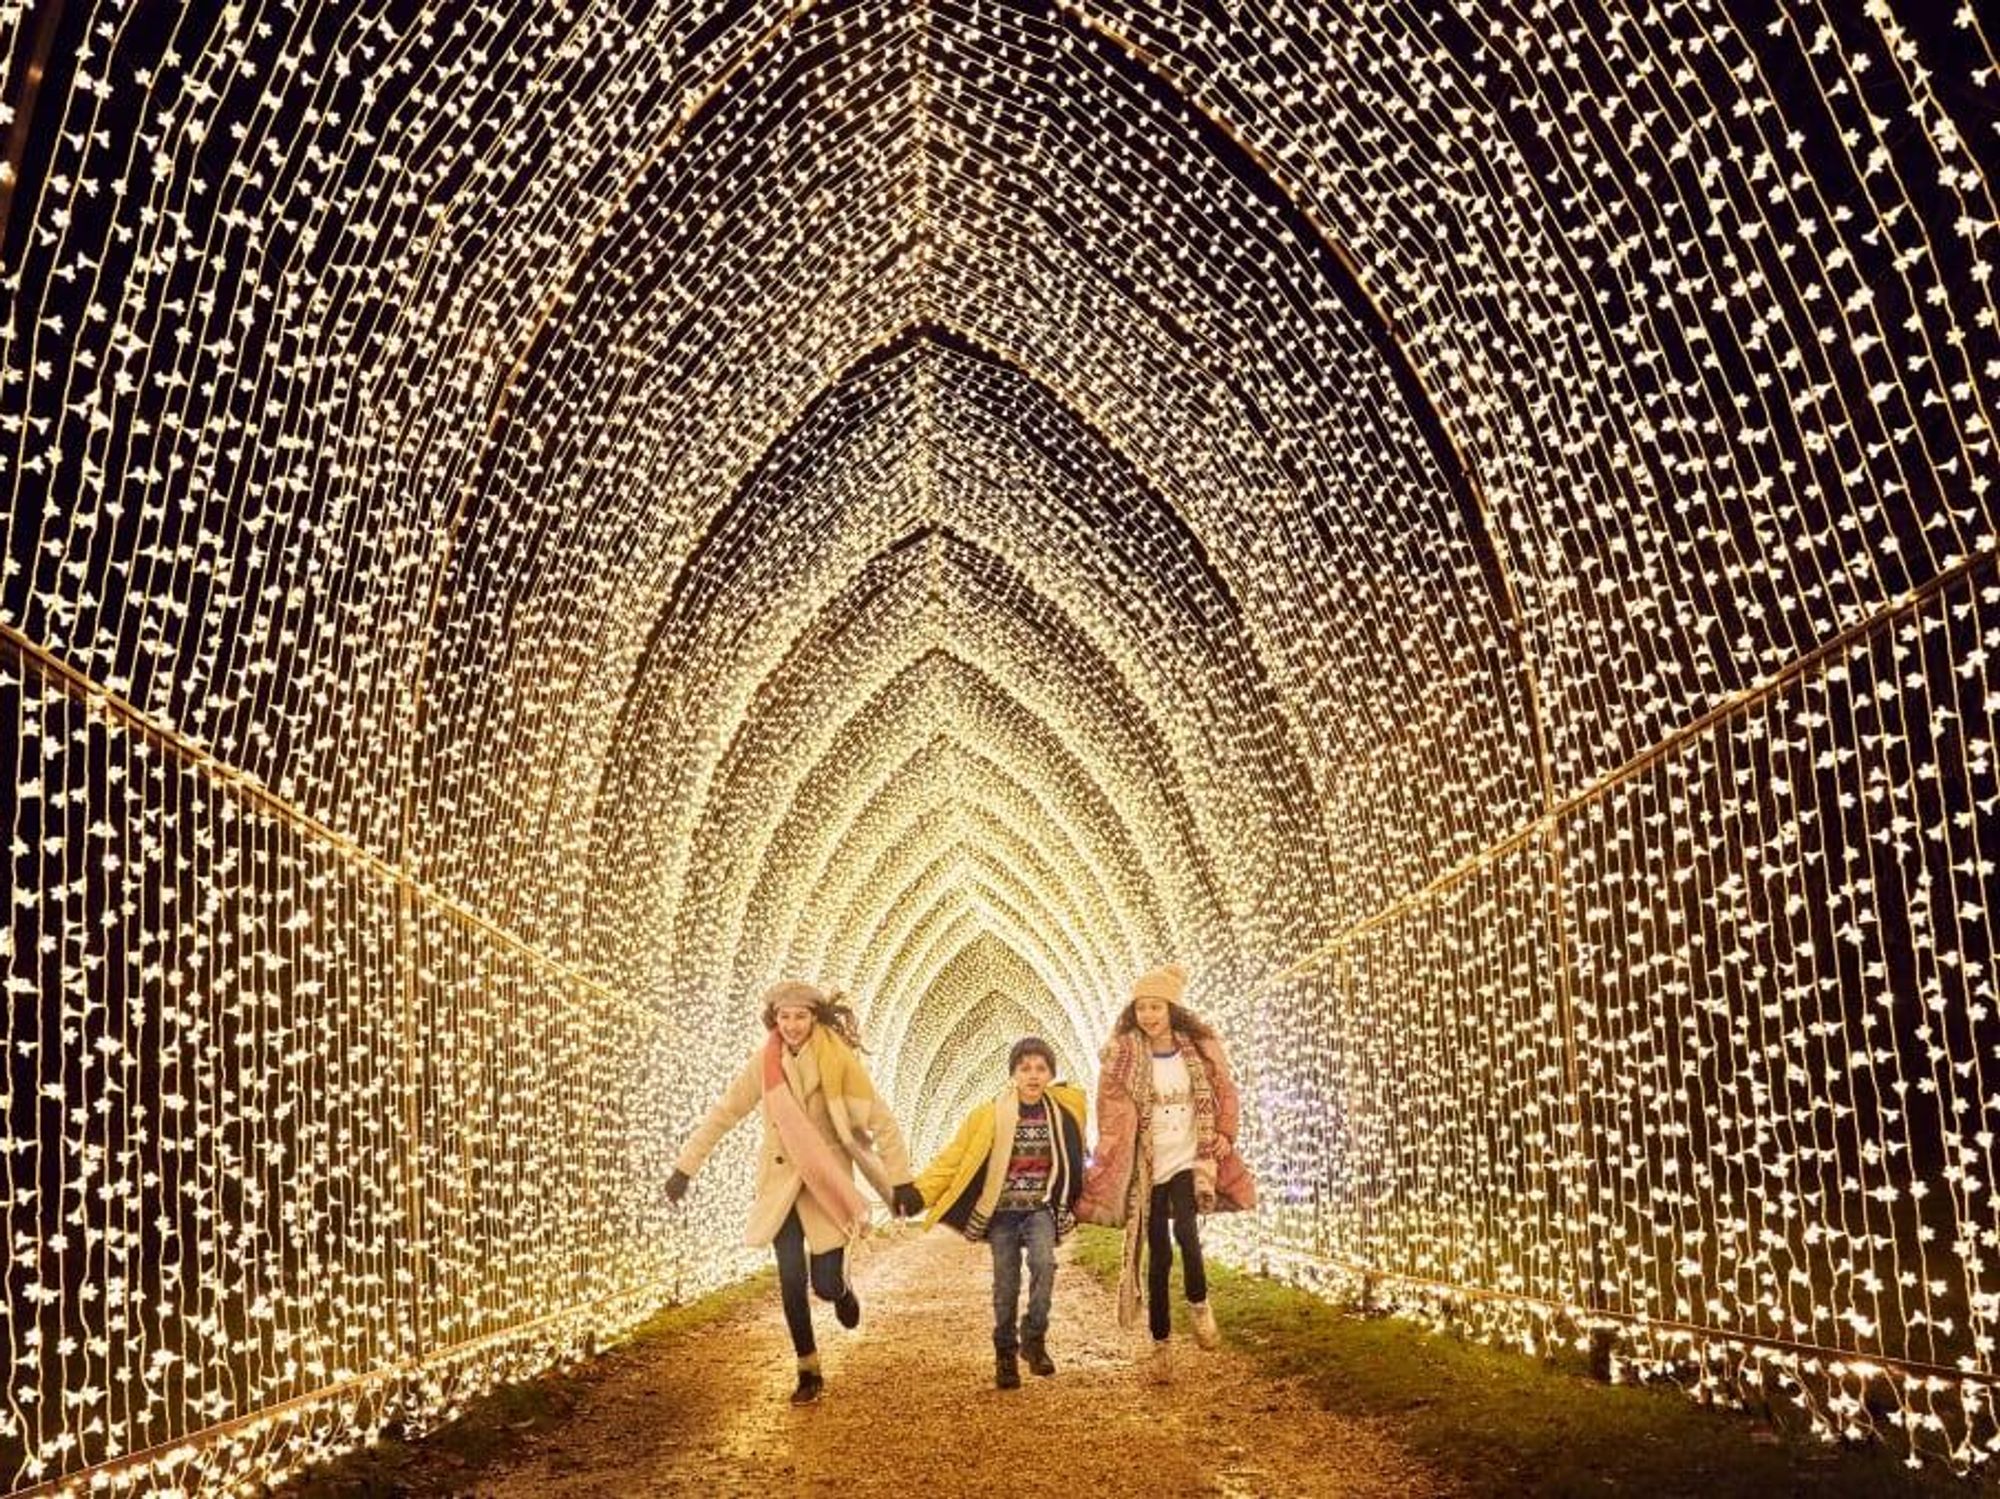 Walk through 1 million holiday lights in spectacular 'Lightscape